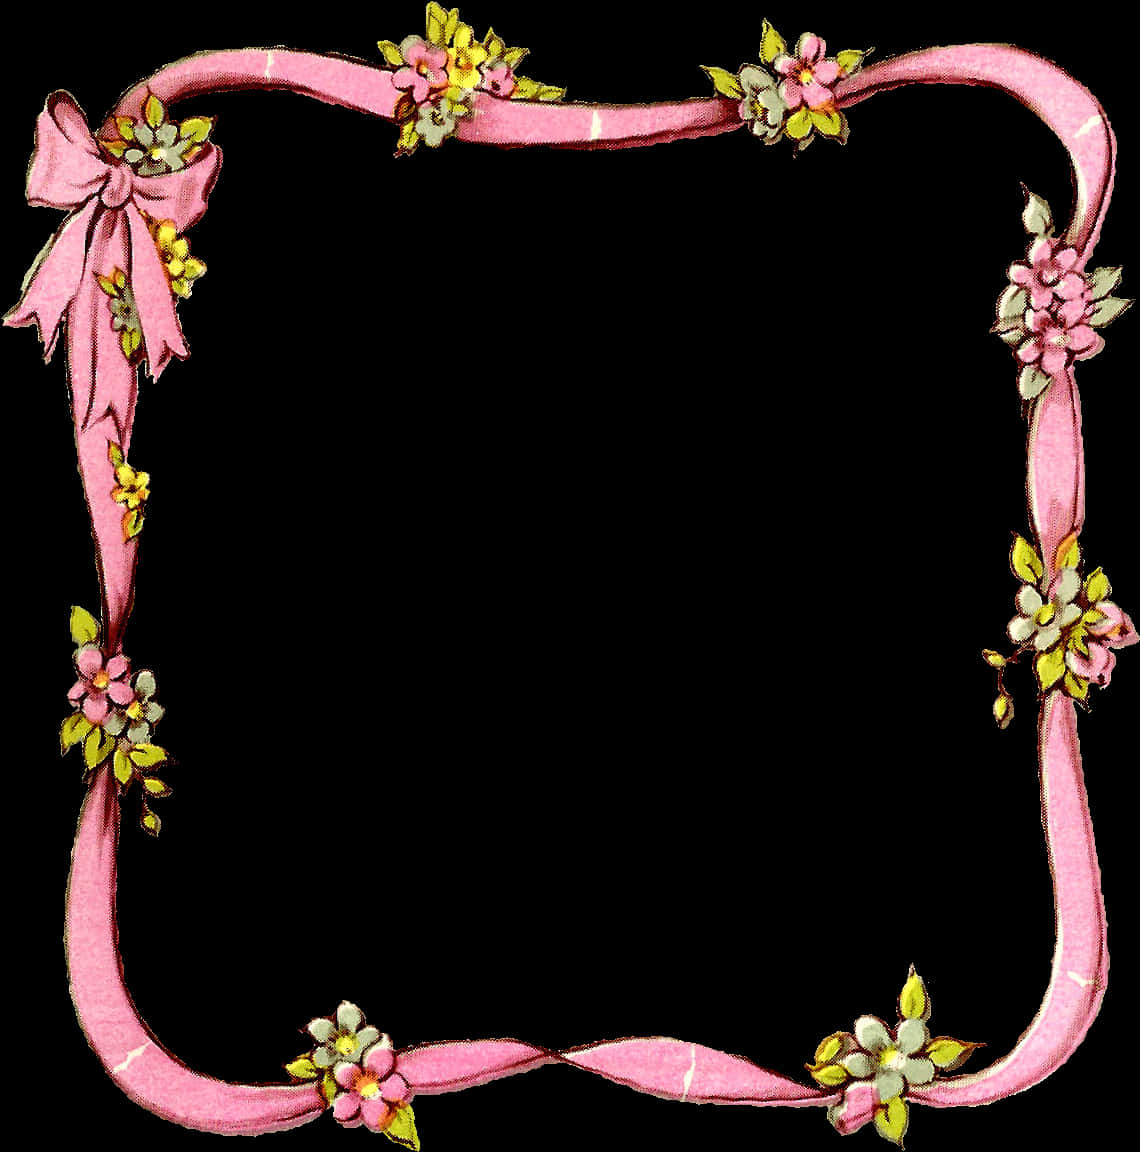 A Pink Ribbon With Flowers And Bows